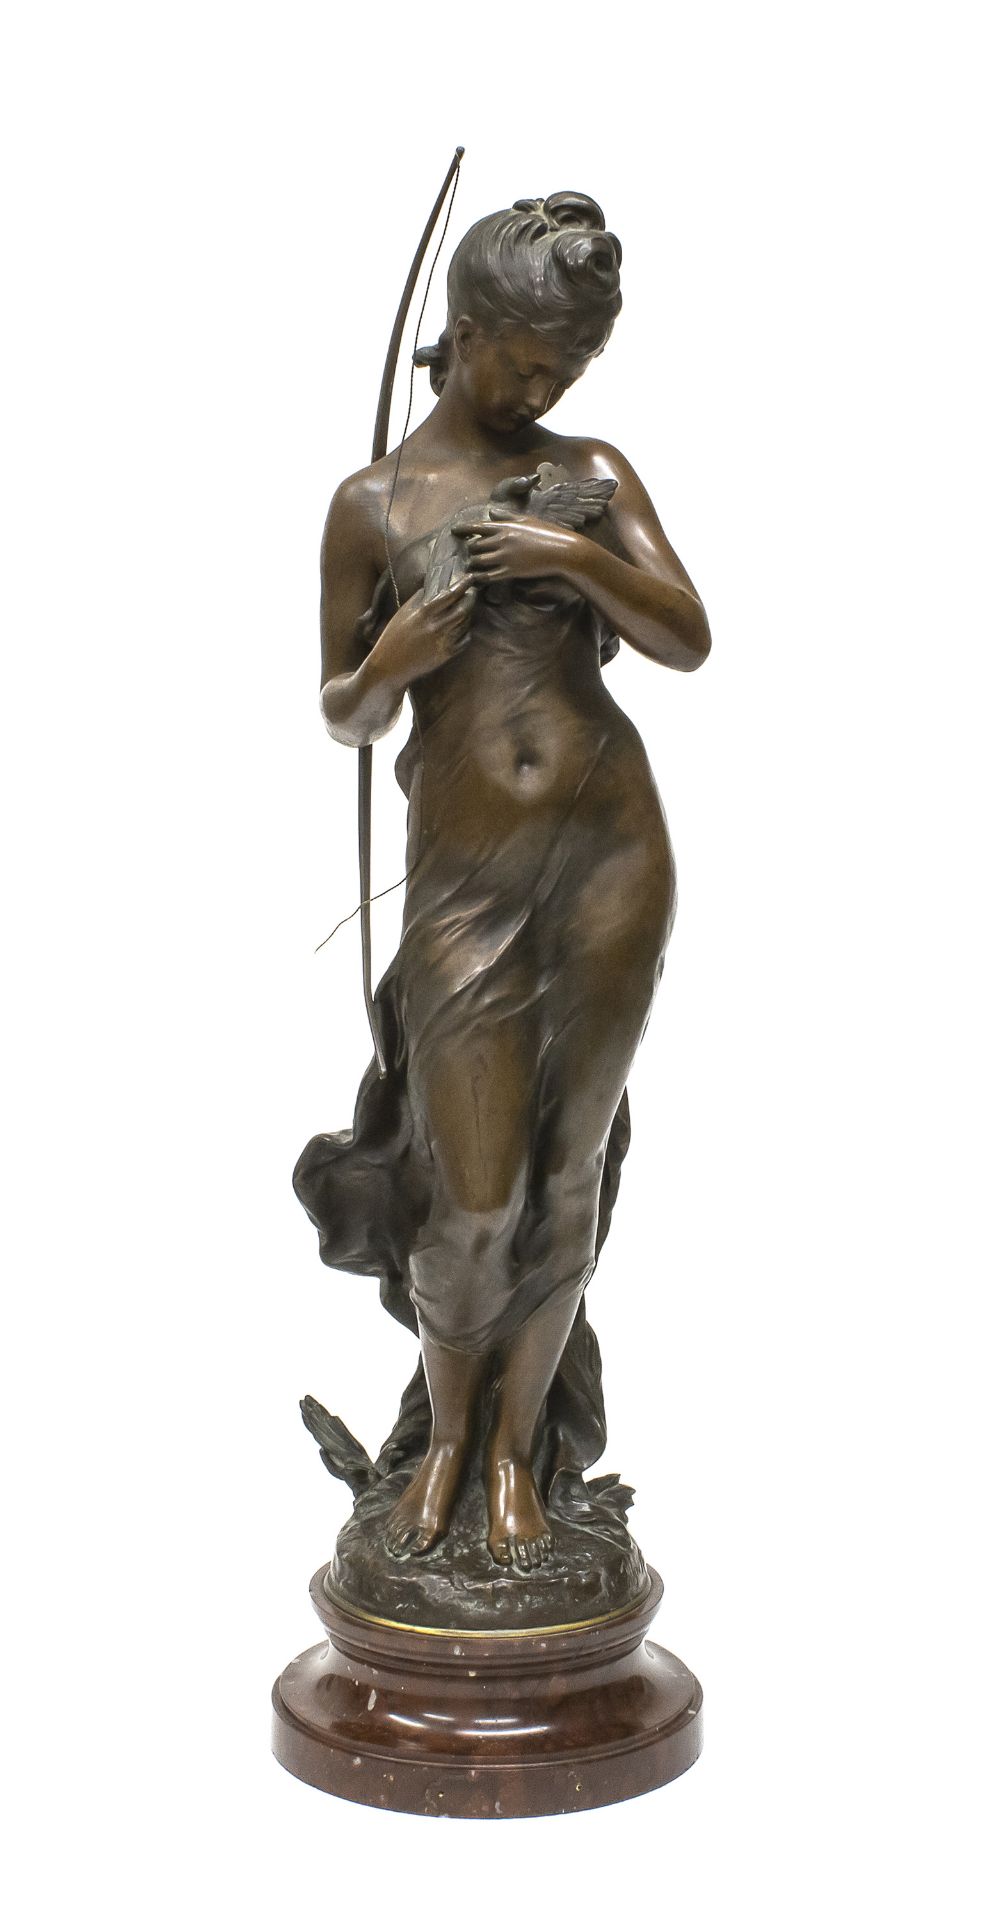 FRENCH BRONZE SCULPTURE END OF THE 19TH CENTURY